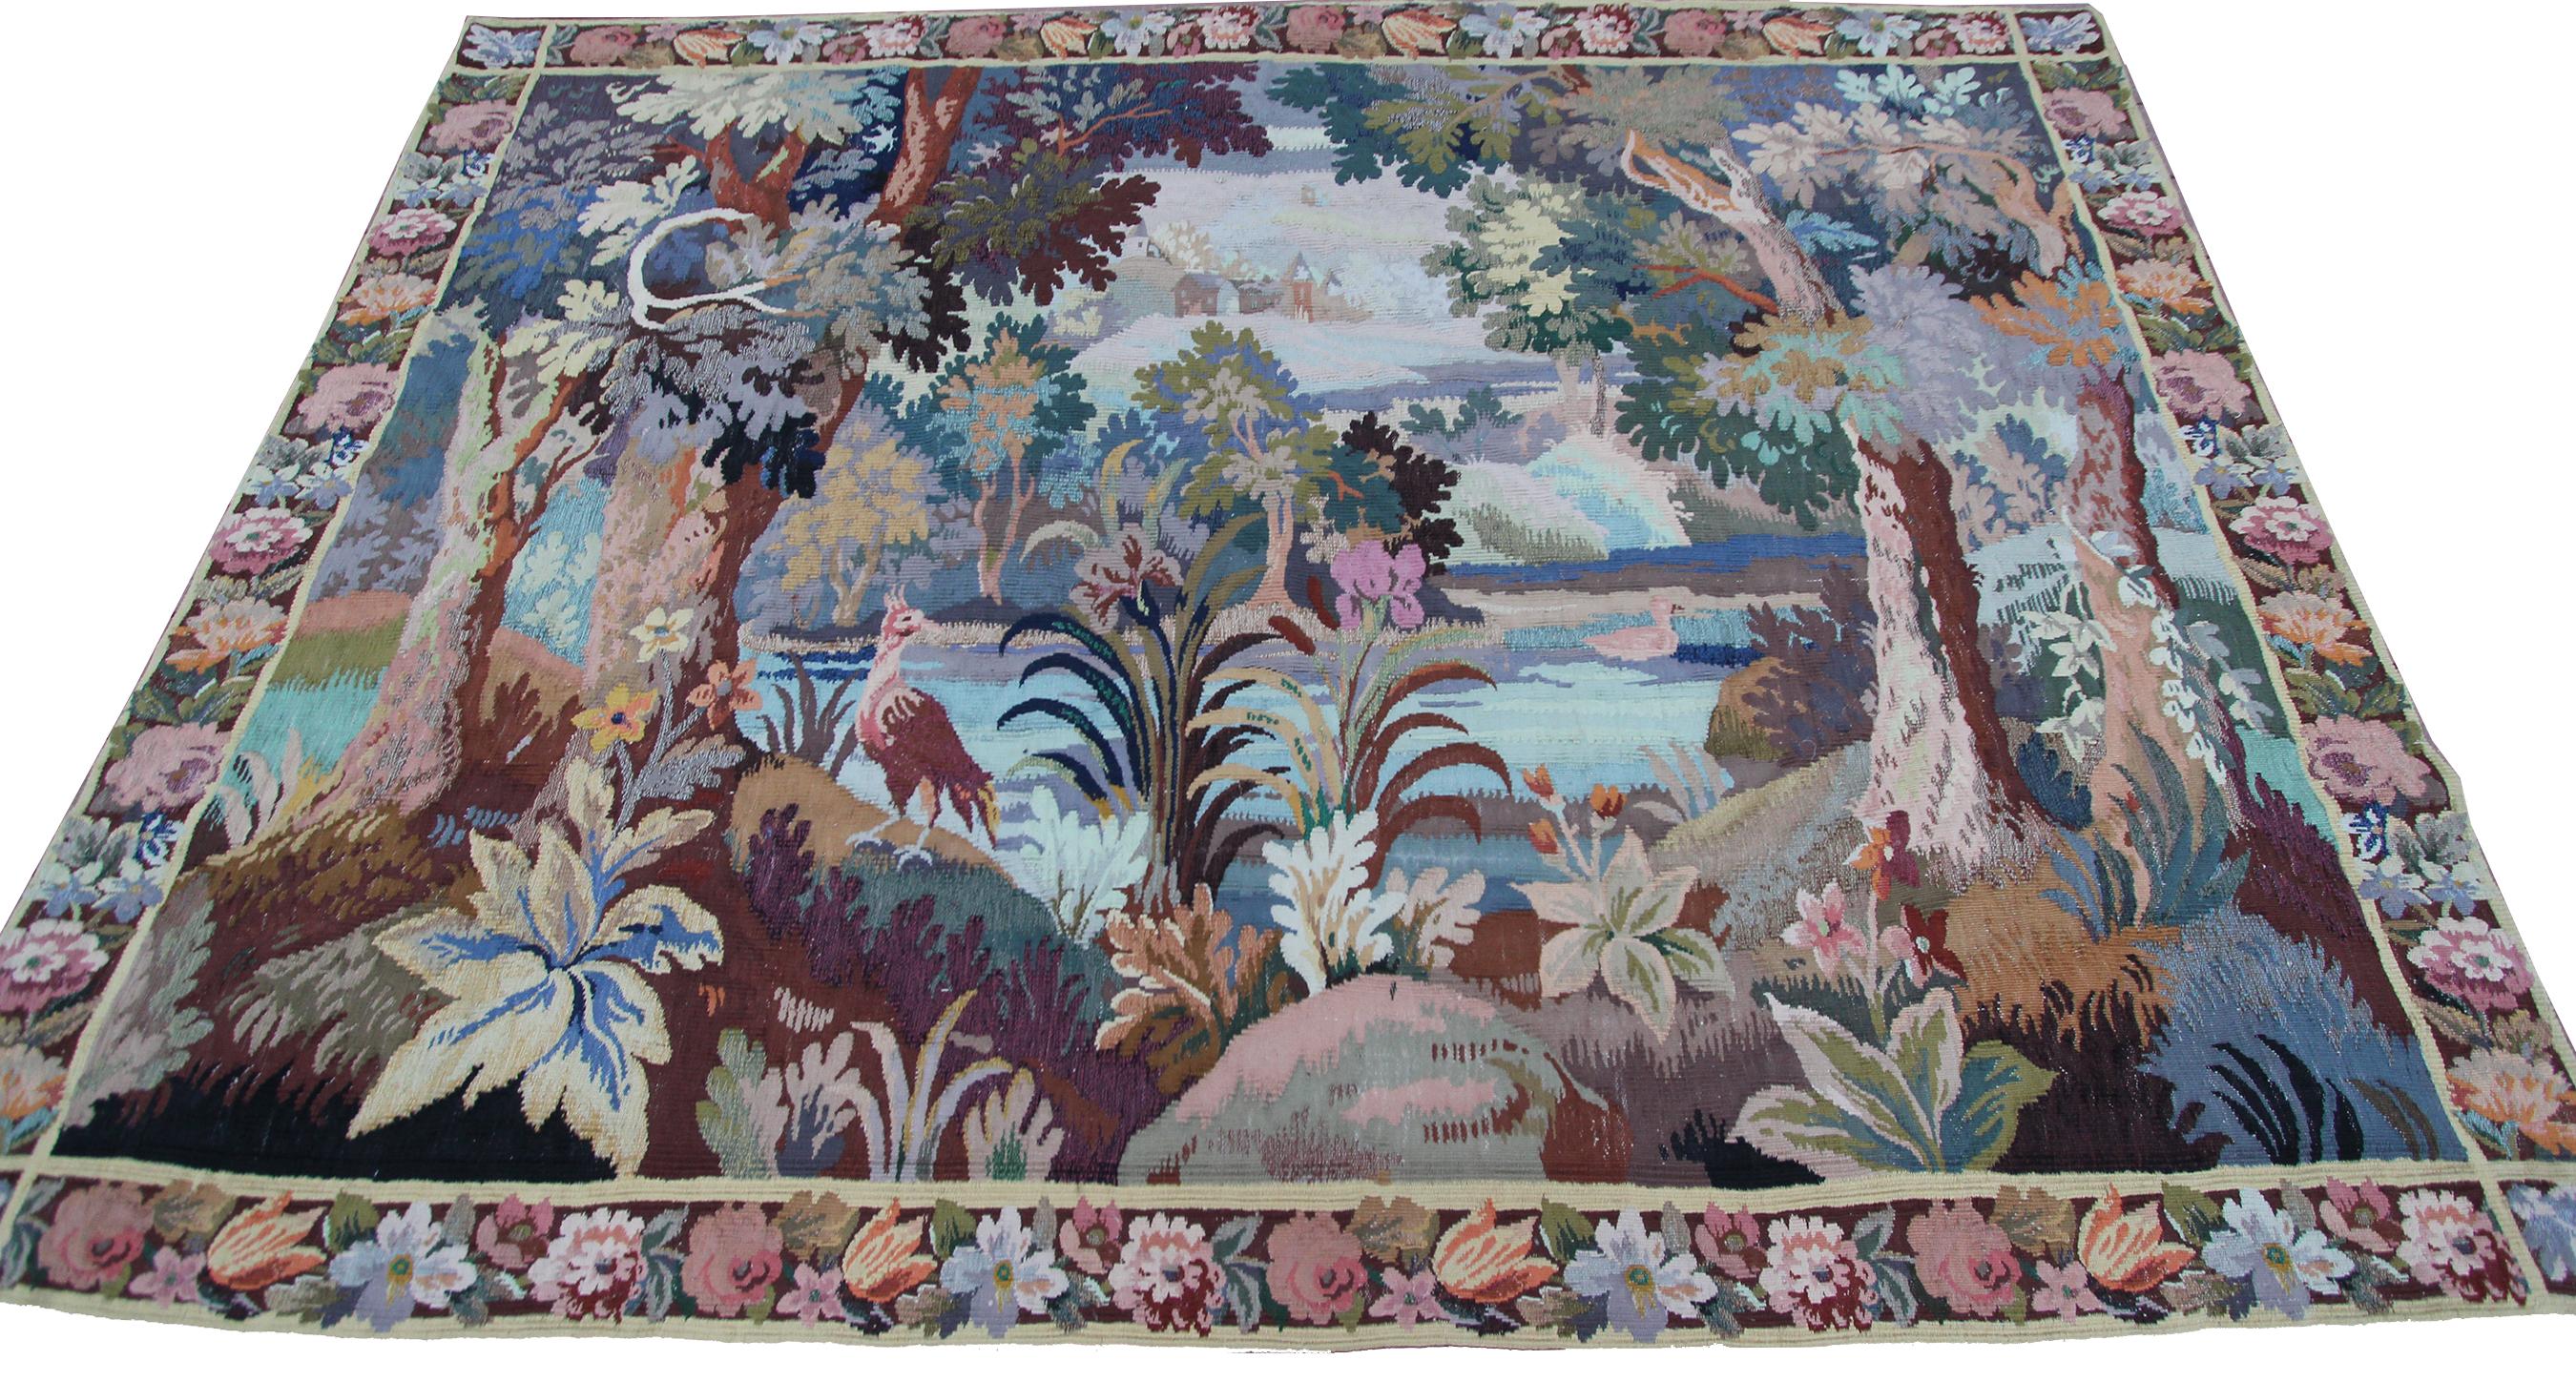 Baroque Rare Antique French Tapestry Handmade Tapestry Flowers Verdure 6x8 167x 234cm For Sale